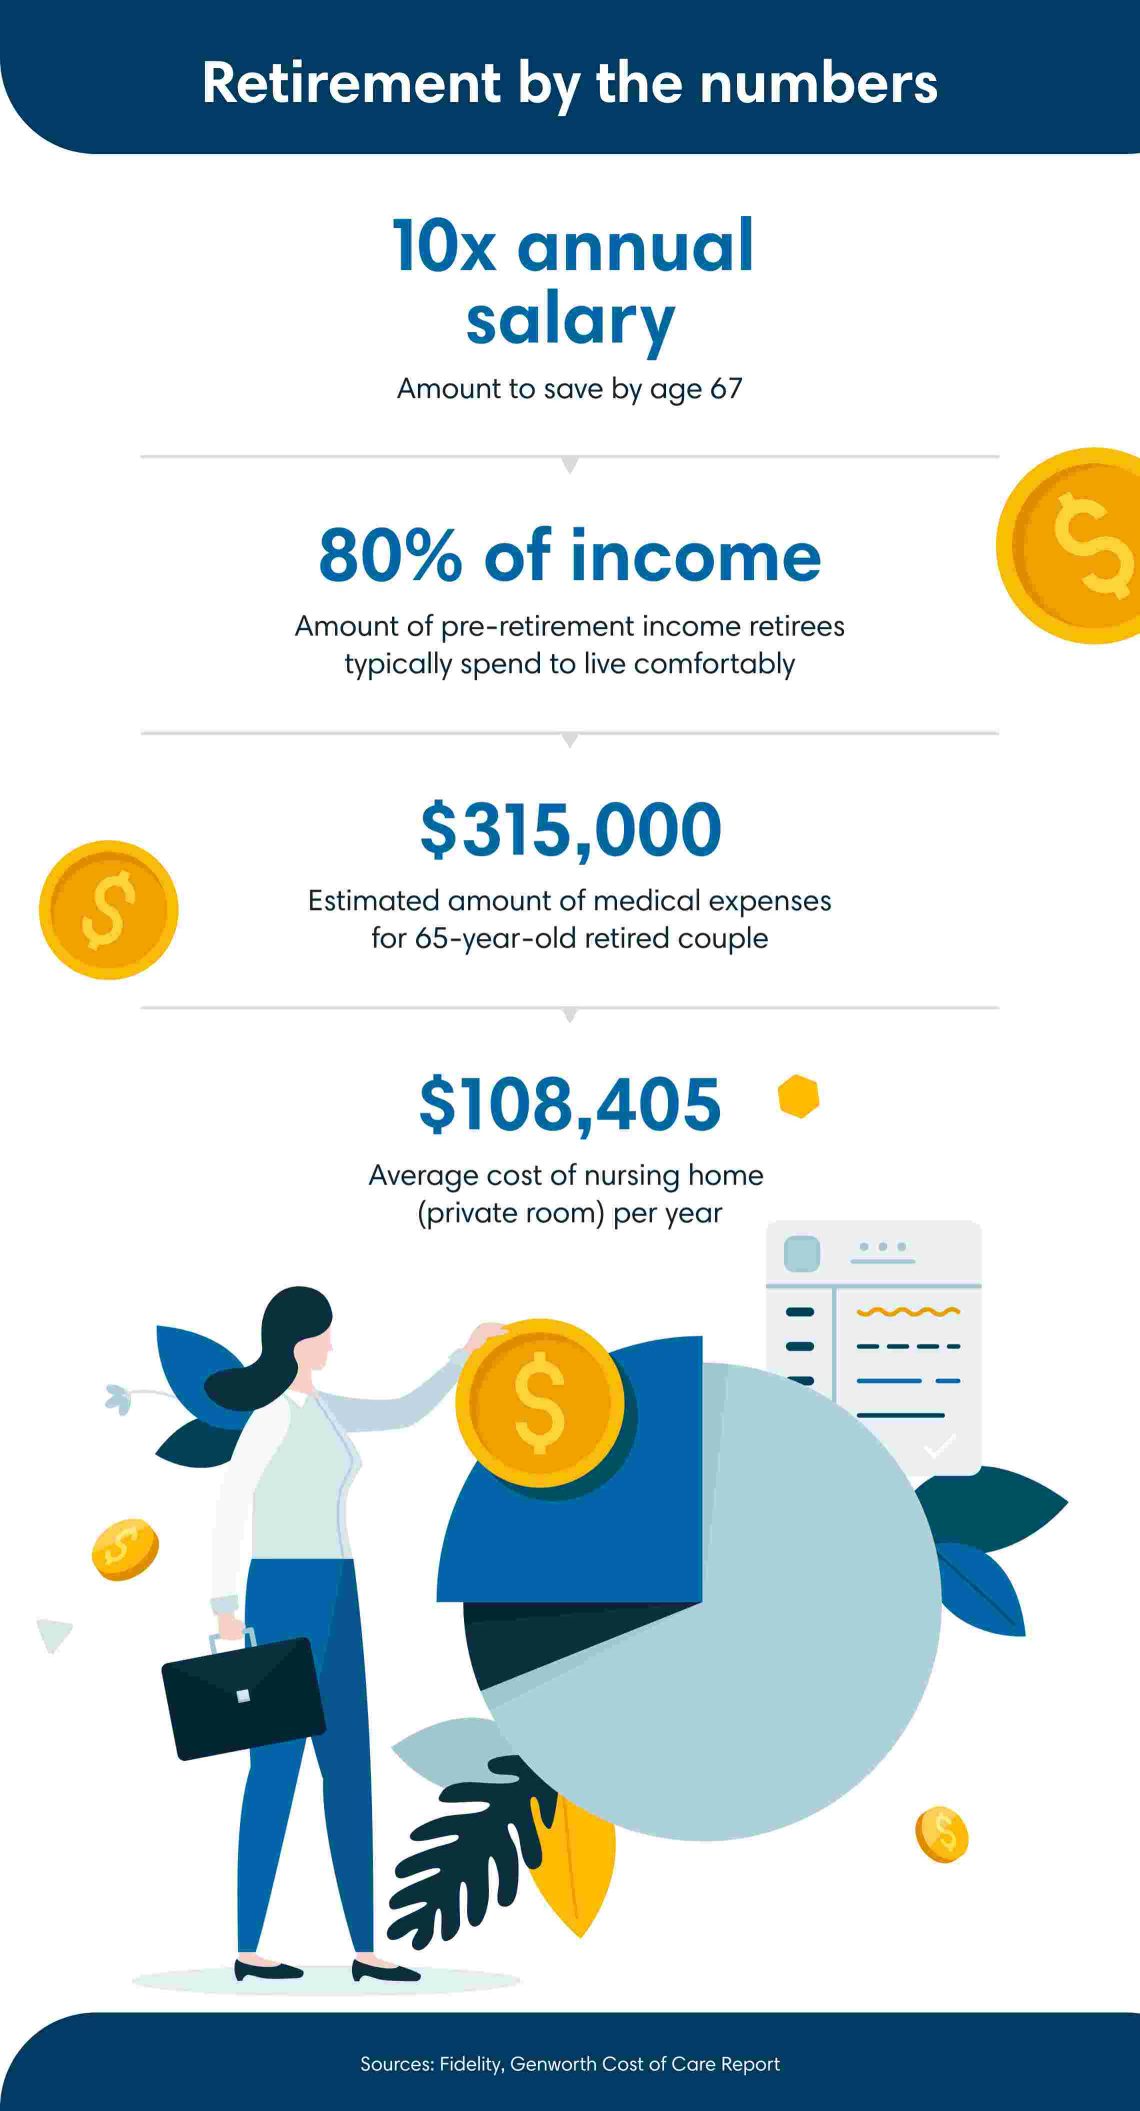 According to Fidelity and Genworth's Cost of Care Report, here's retirement by the numbers. Save 10 times your annual salary by age 67. Retirees typically spend 80% of their pre-retirement income to live comfortably. The estimated amount of medical expenses for a 65-year-old retired couple is $315,000. The average cost of a nursing home private room is $108,405 a year.